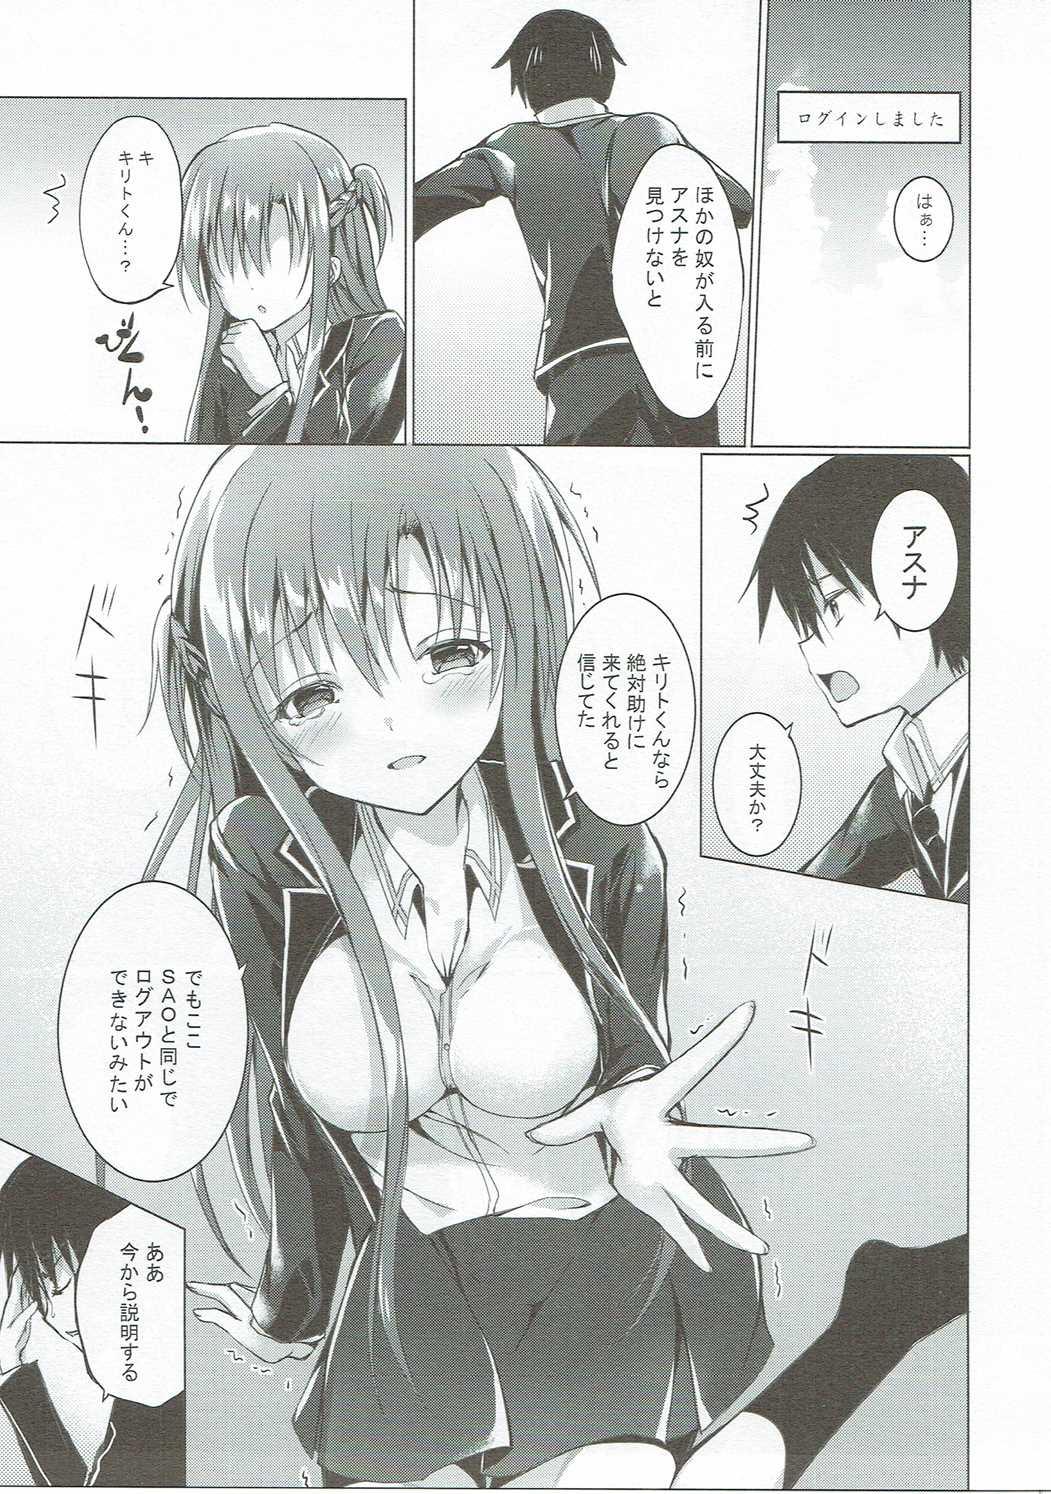 Sex Pussy Asuna to VR Game - Sword art online Chica - Page 6